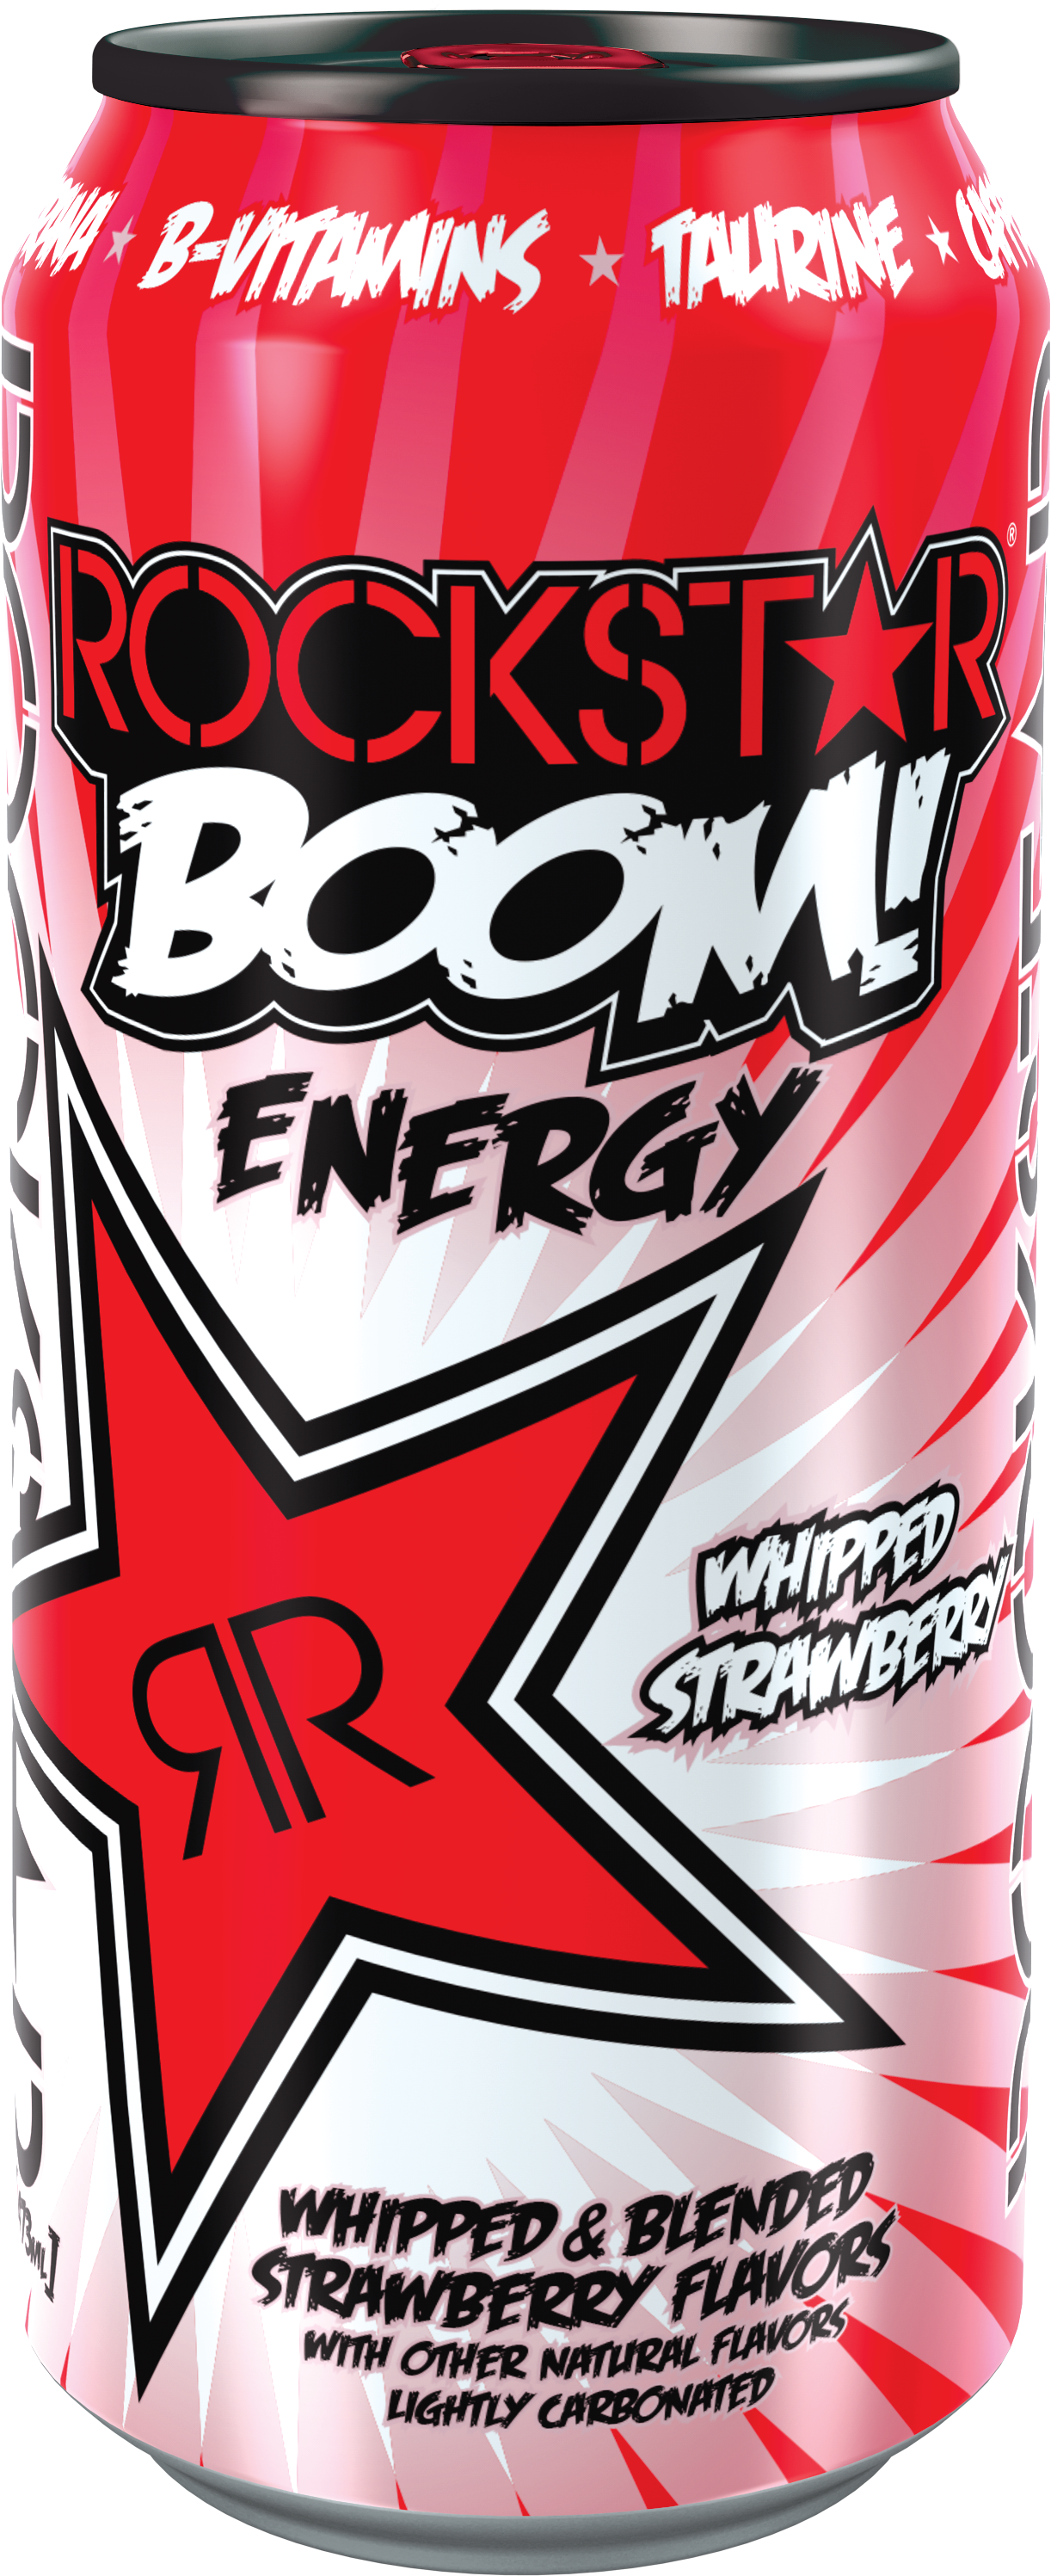 Rockstar Boom Energy Drink Whipped Strawberry